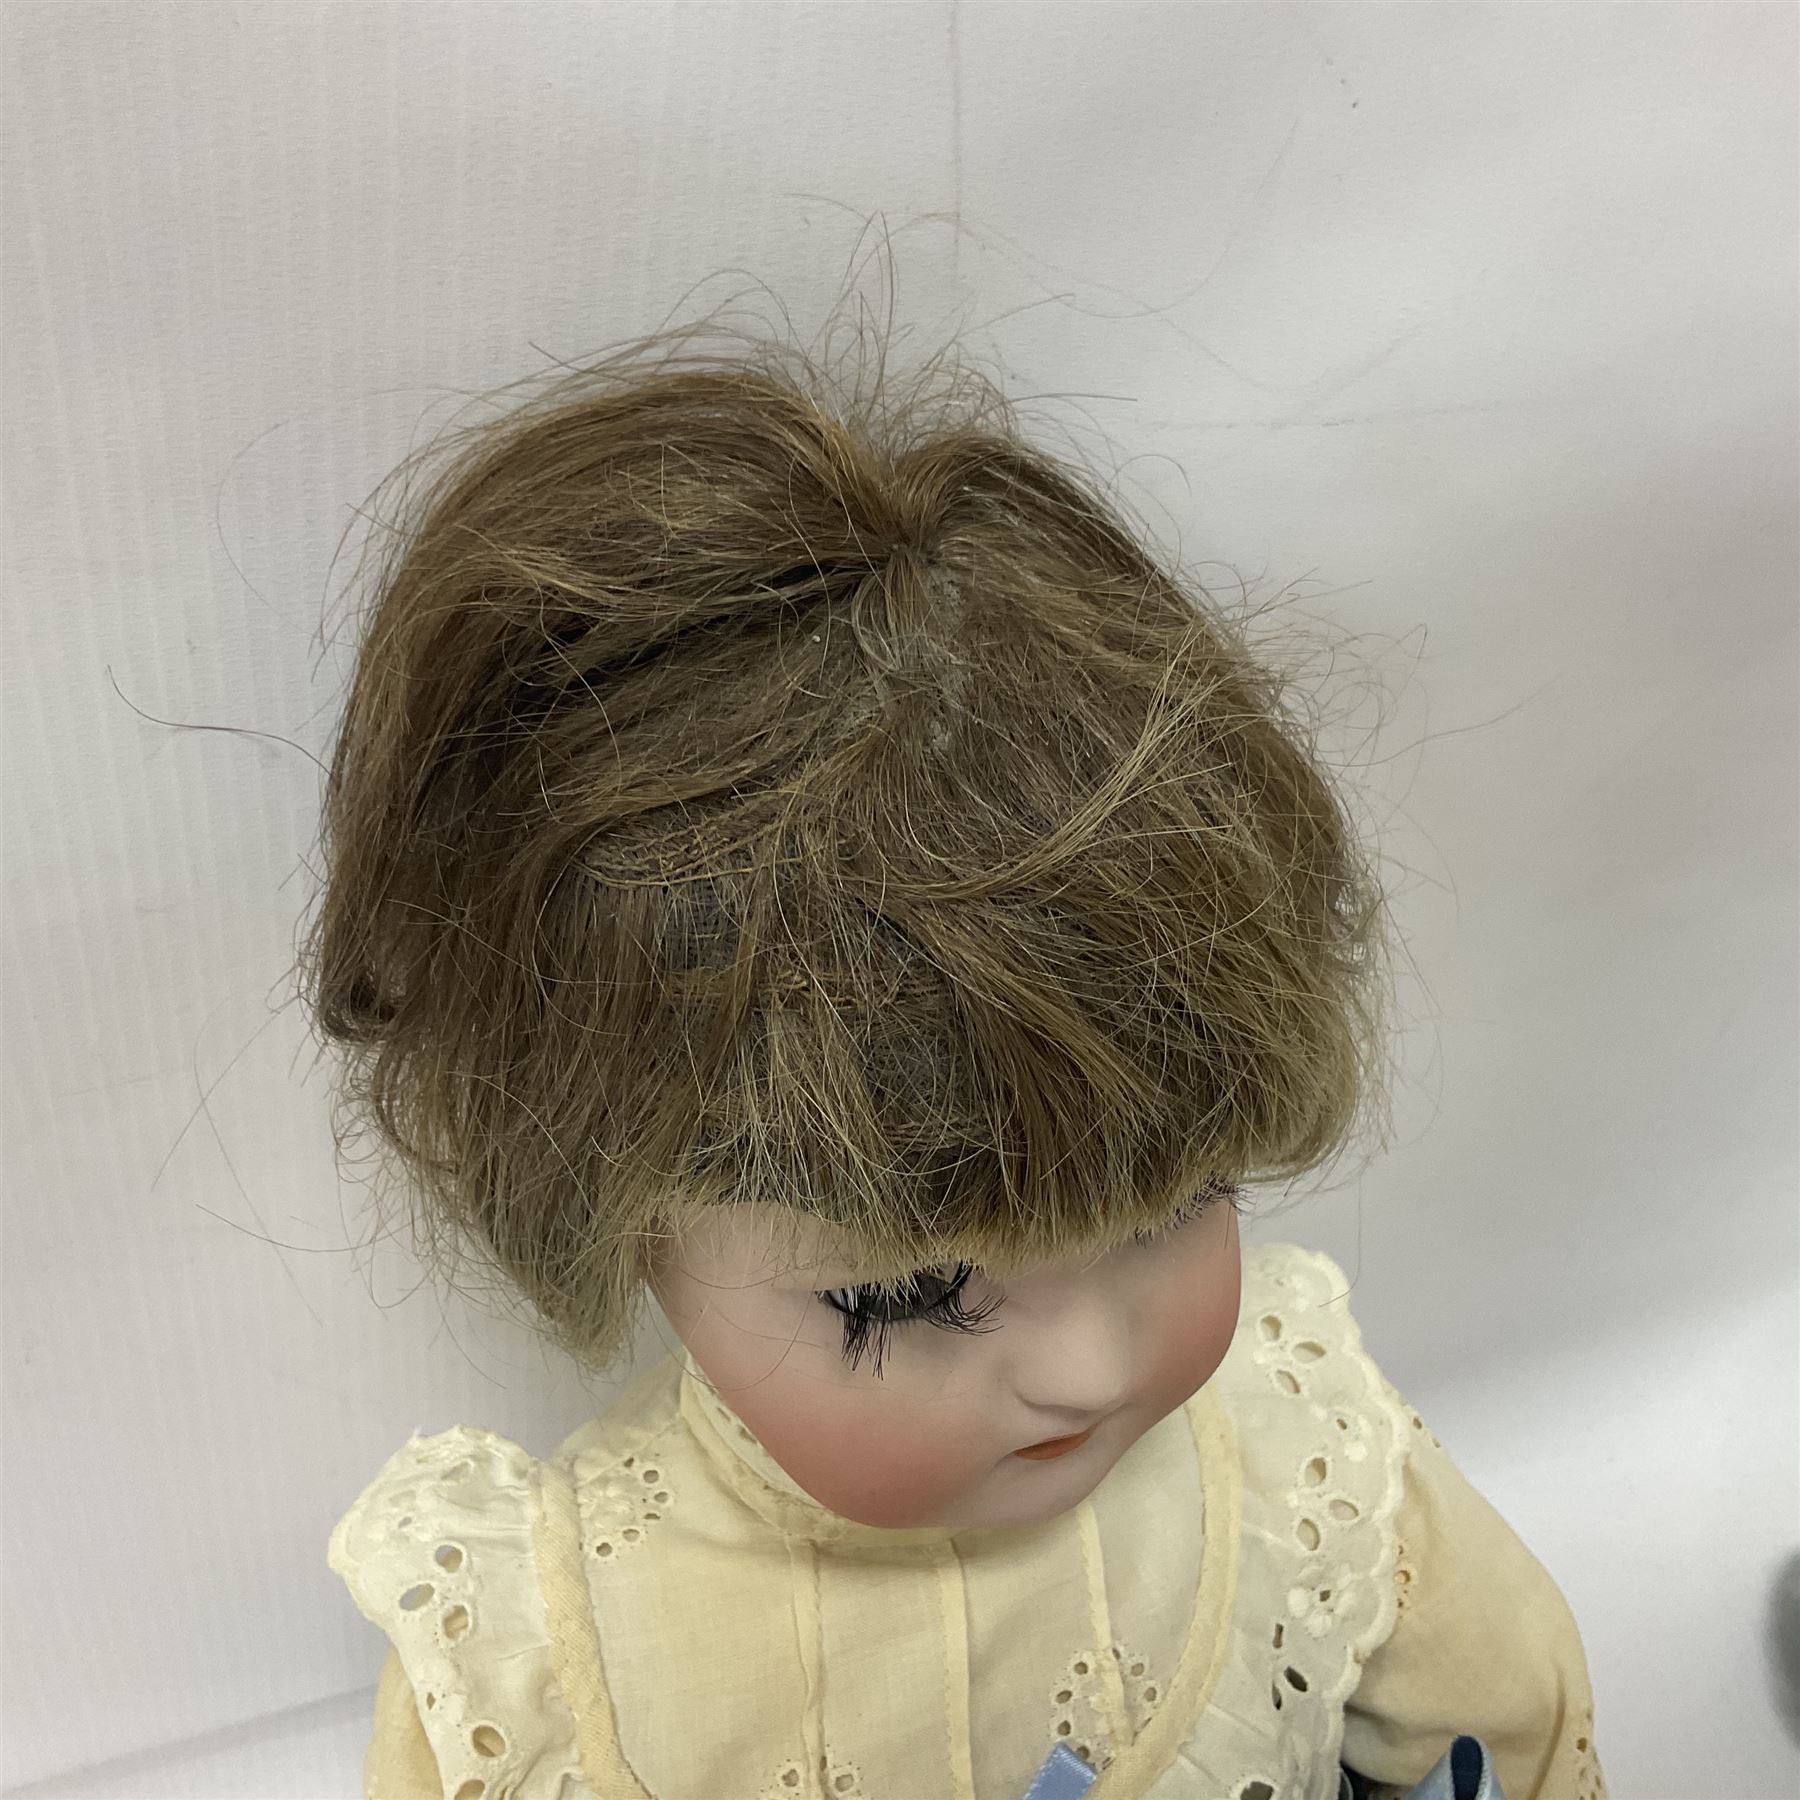 Simon & Halbig bisque head doll with applied hair - Image 8 of 13